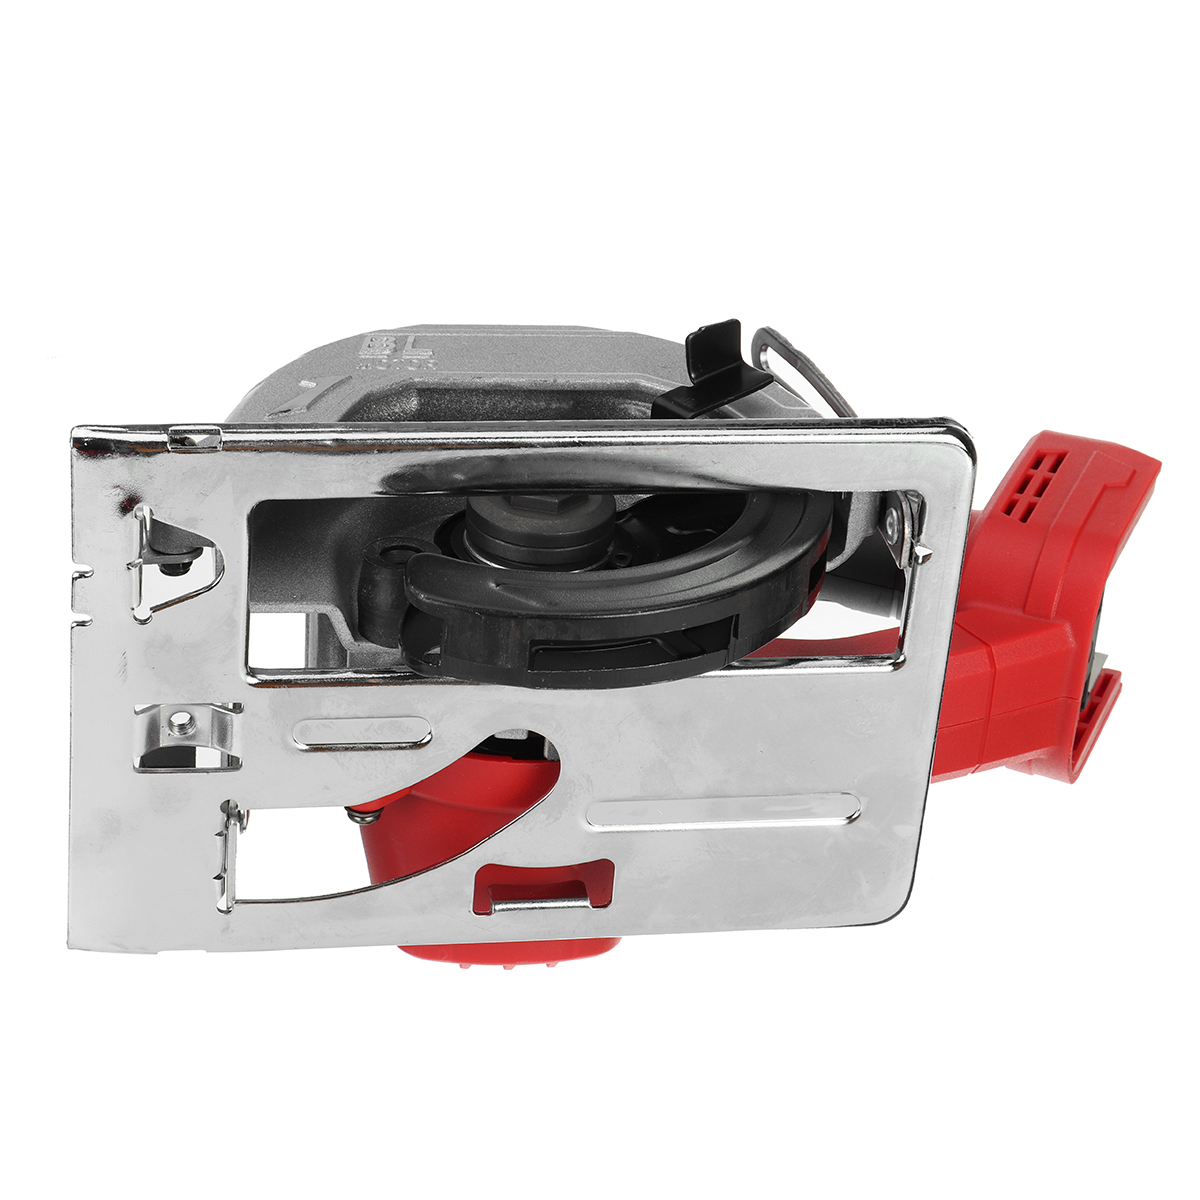 10800RPM-5inch-Red-Electric-Circular-Saw-Tool-Cutting-Machine-For-Makita-18-21V-Battery-1803012-6